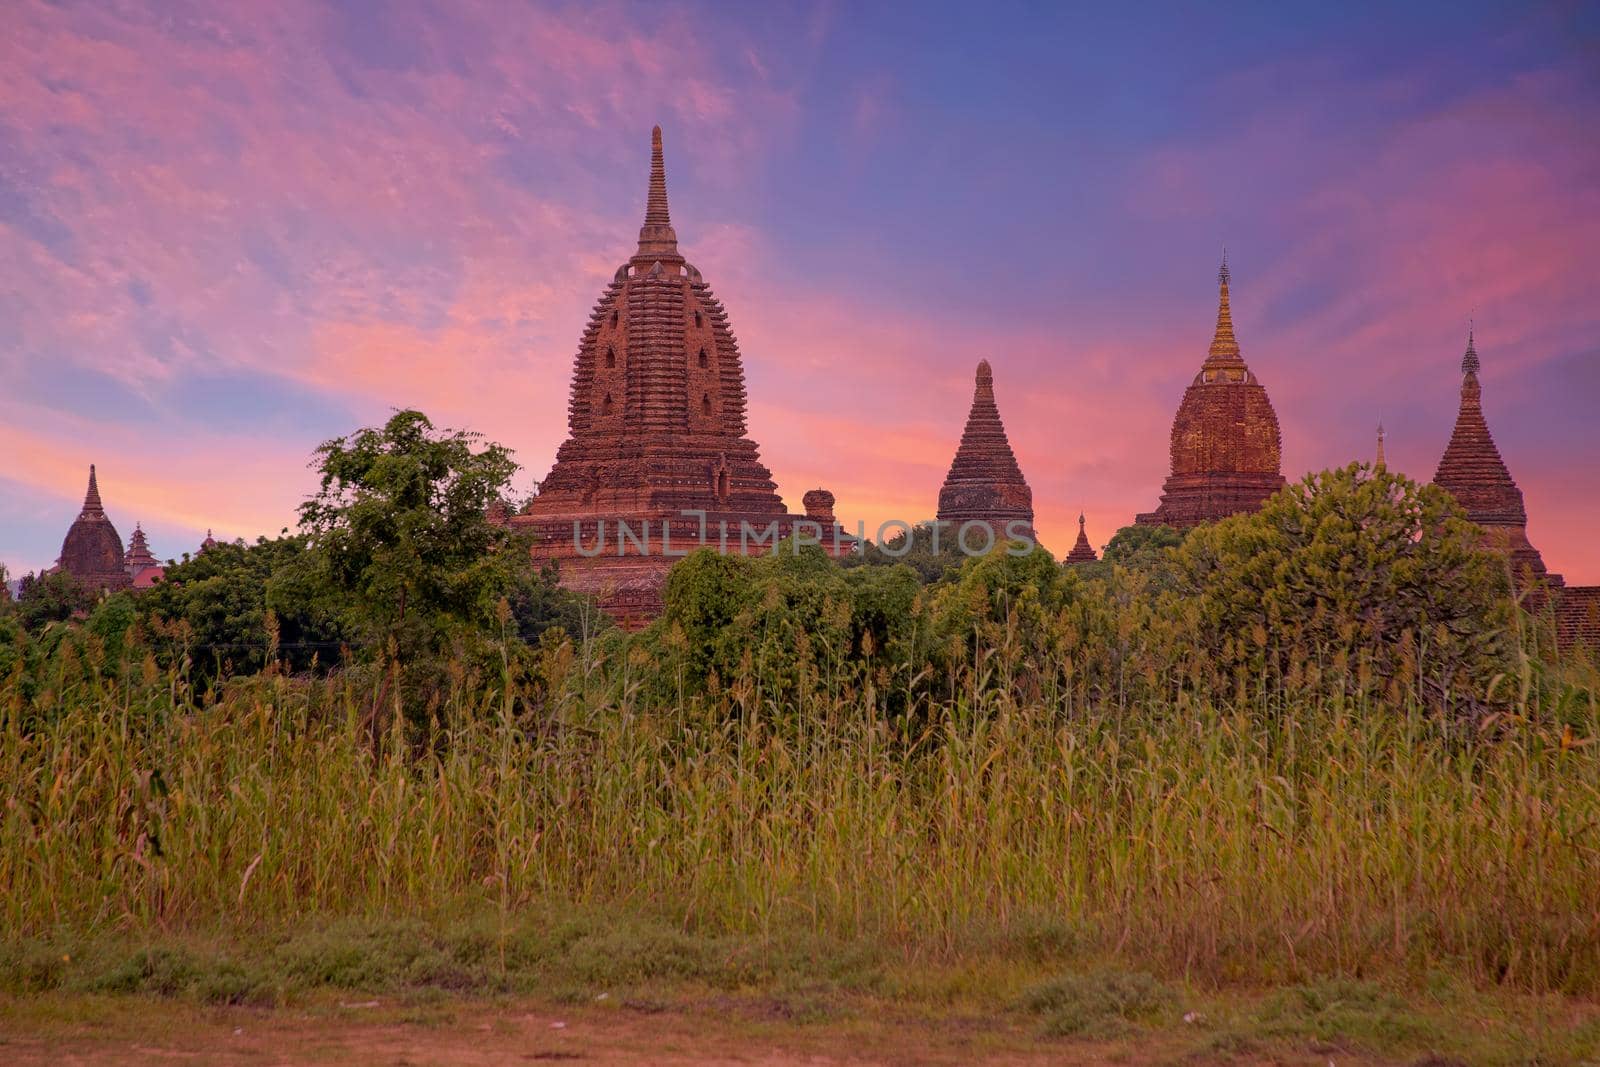 Ancient Temples in Bagan, Myanmar at sunset by devy